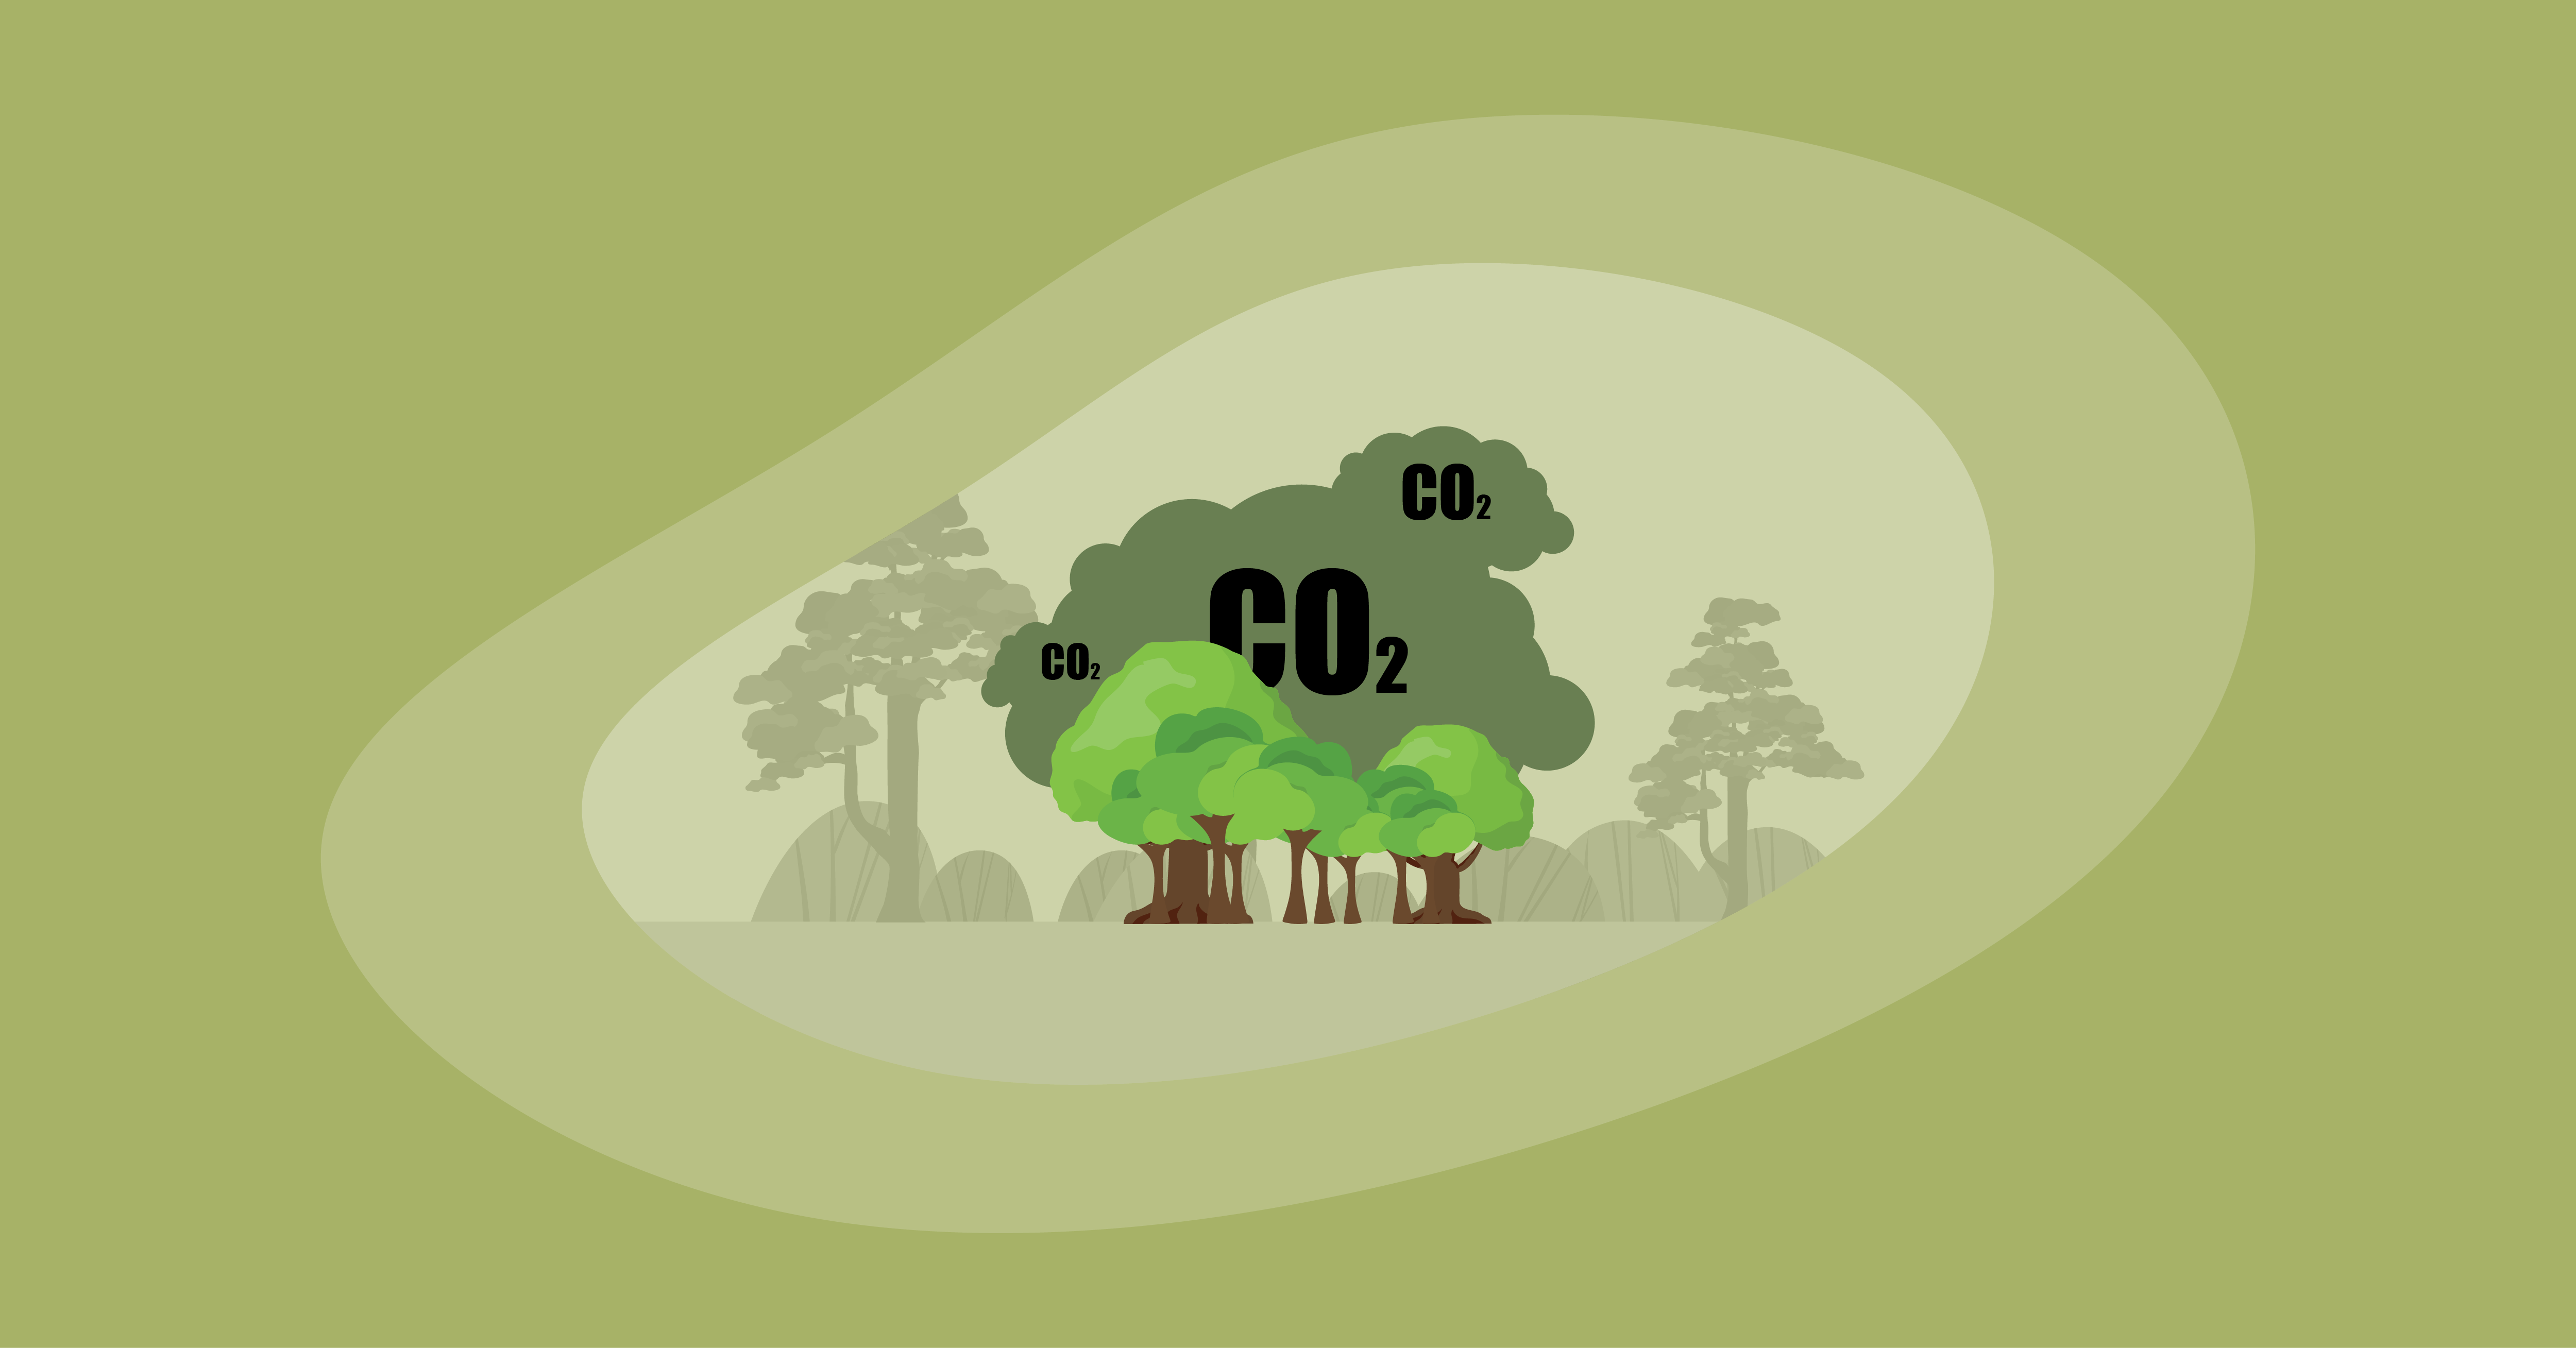 Attempted illustration of carbon offsetting